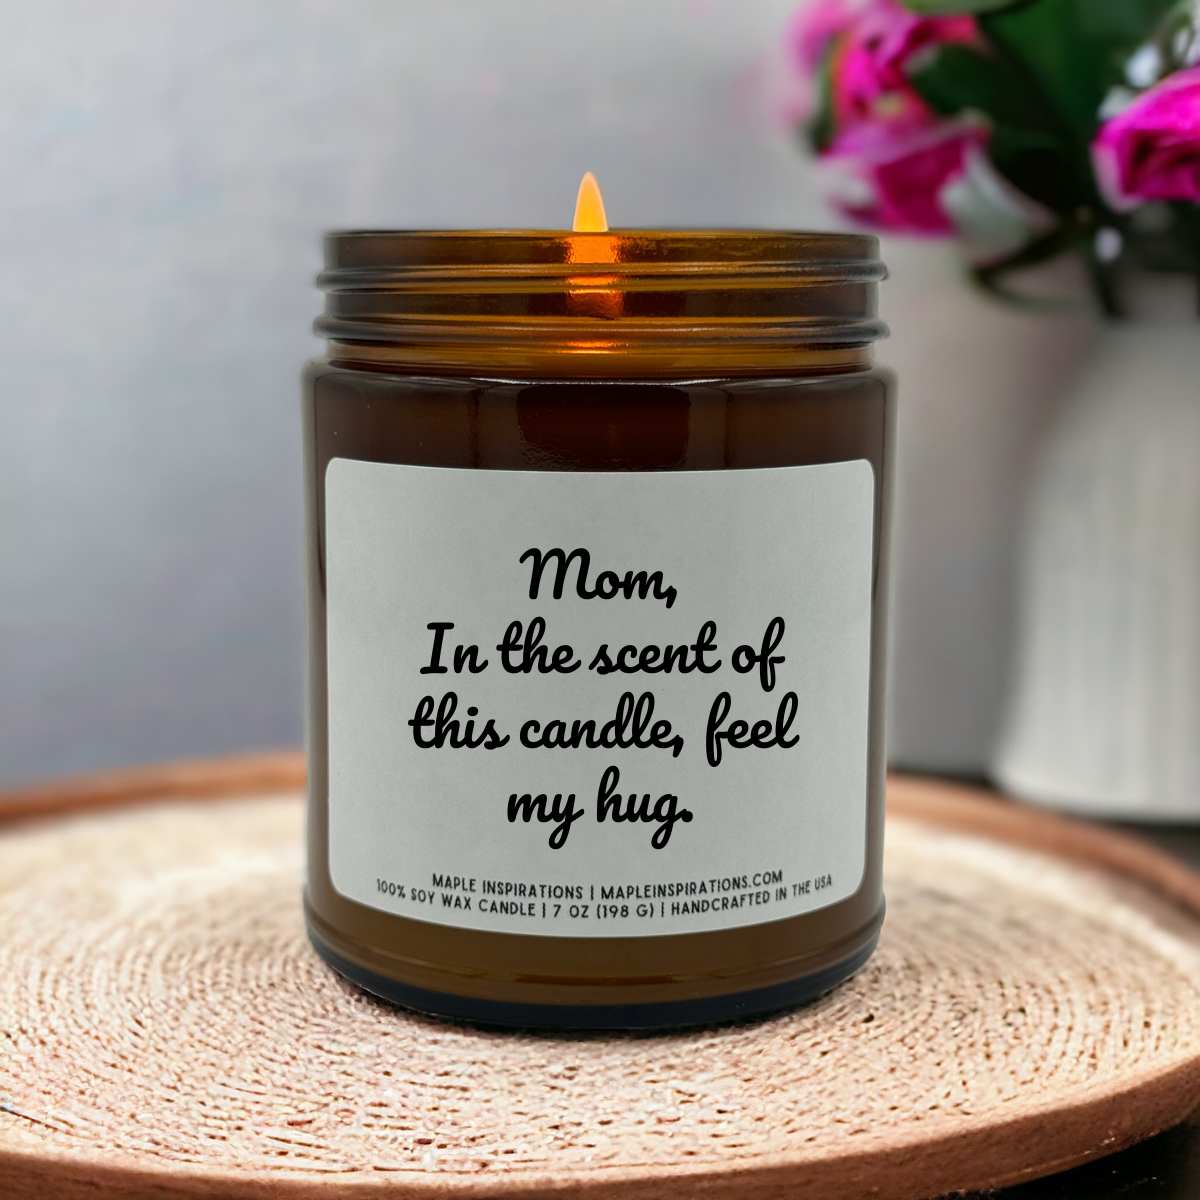 Hug Candle for Mom, Scented Candle, Mother's Day Gift for Mom, Soy Candle Gift for Mothers Day, Mothers Day Candle Mom Gift, Mom Birthday, Mom Gift From Daughter / Son